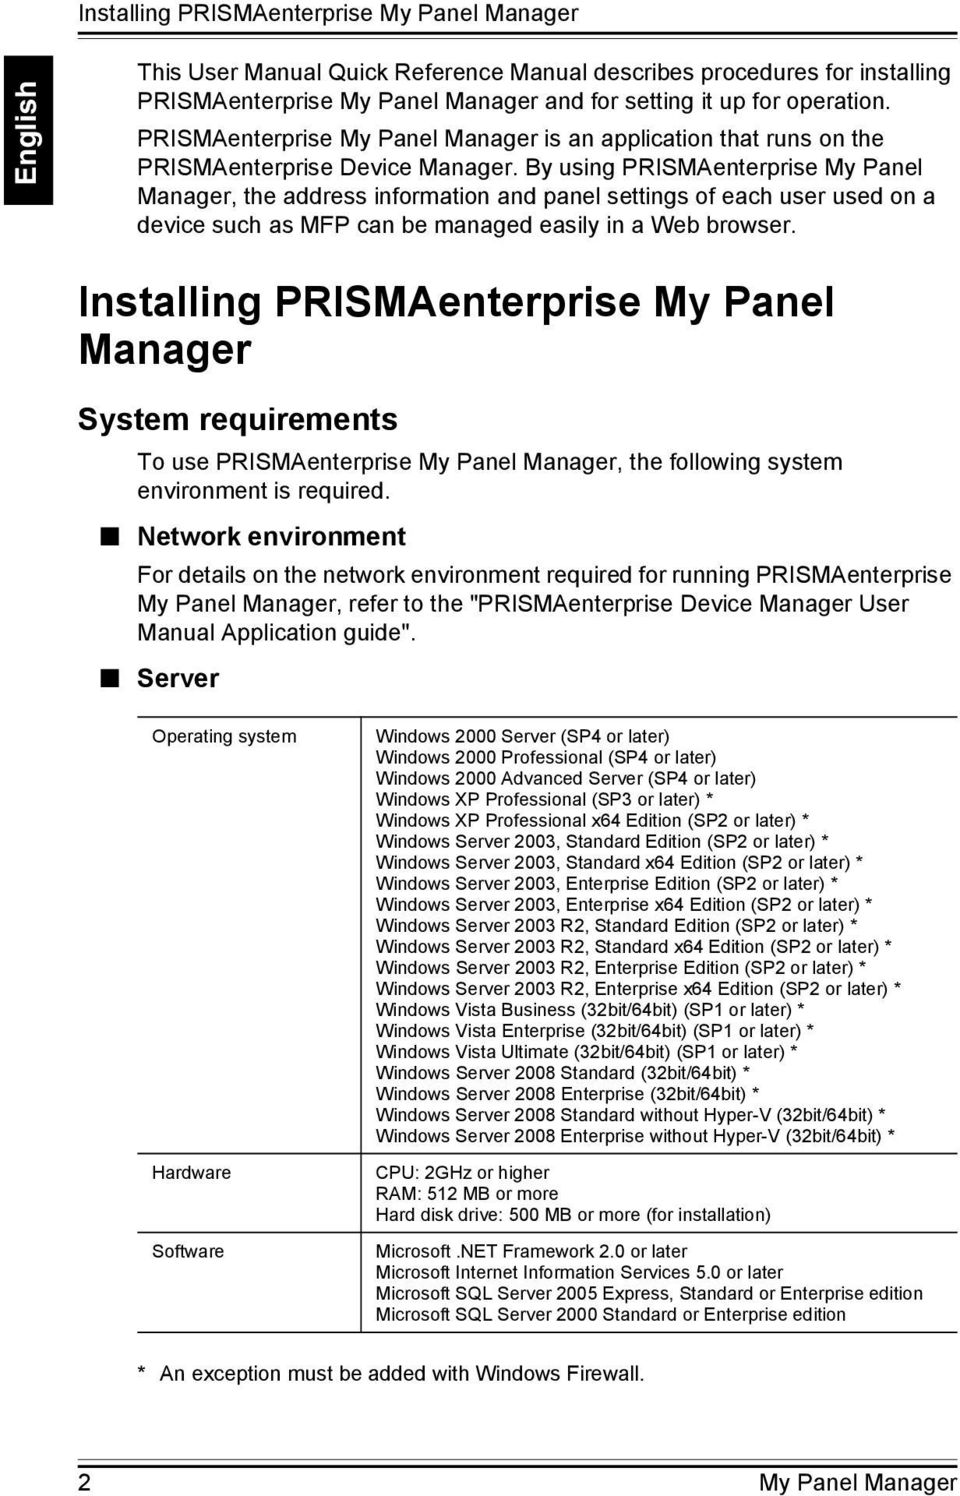 By using PRISMAenterprise My Panel Manager, the address information and panel settings of each user used on a device such as MFP can be managed easily in a Web browser.